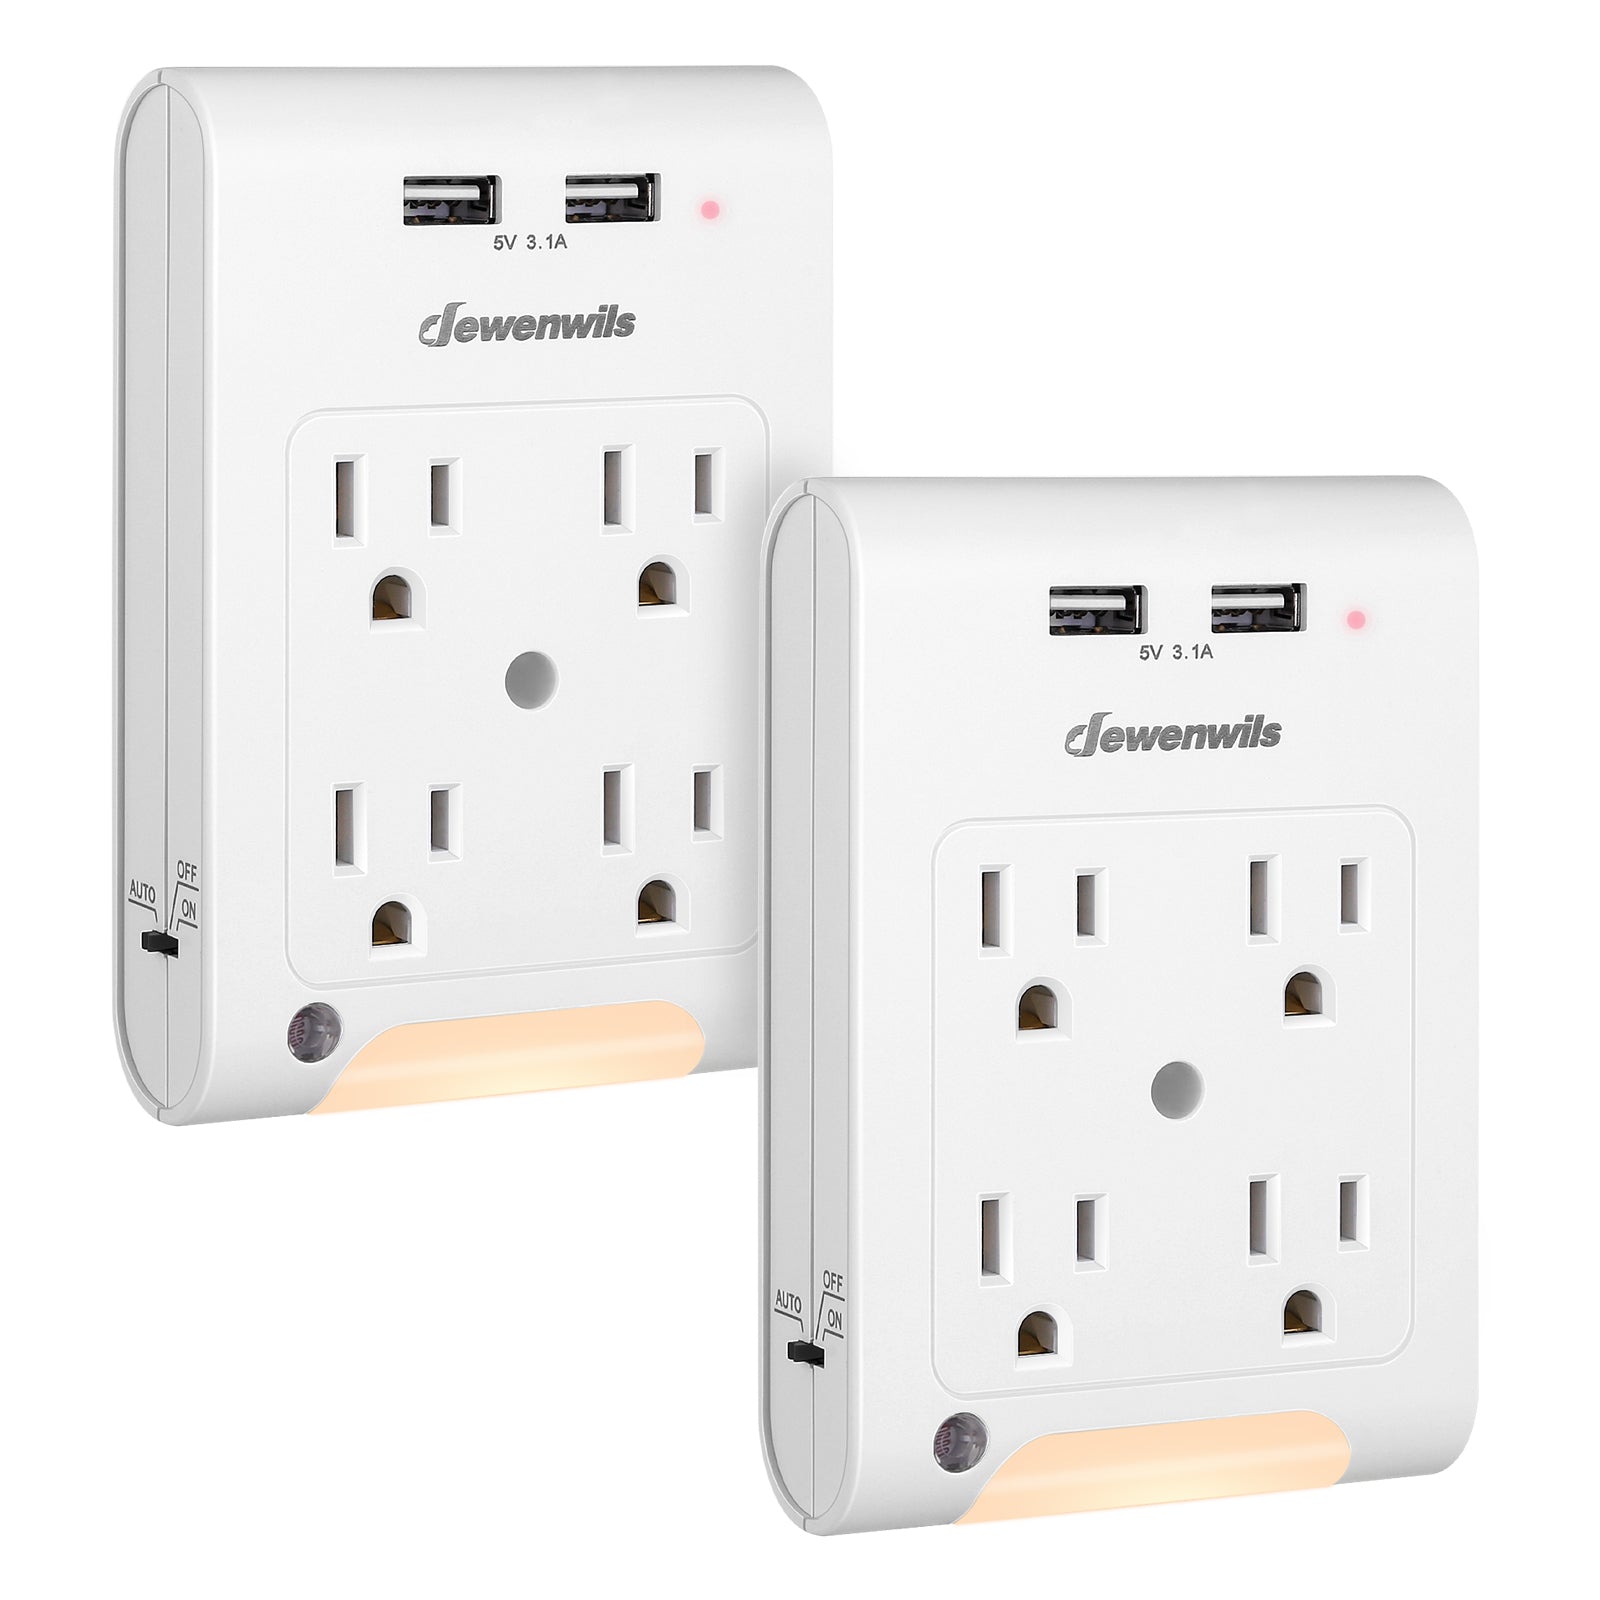 2 Pack 3 Outlet Wall Plug With Sensor Night Light Grounded AC